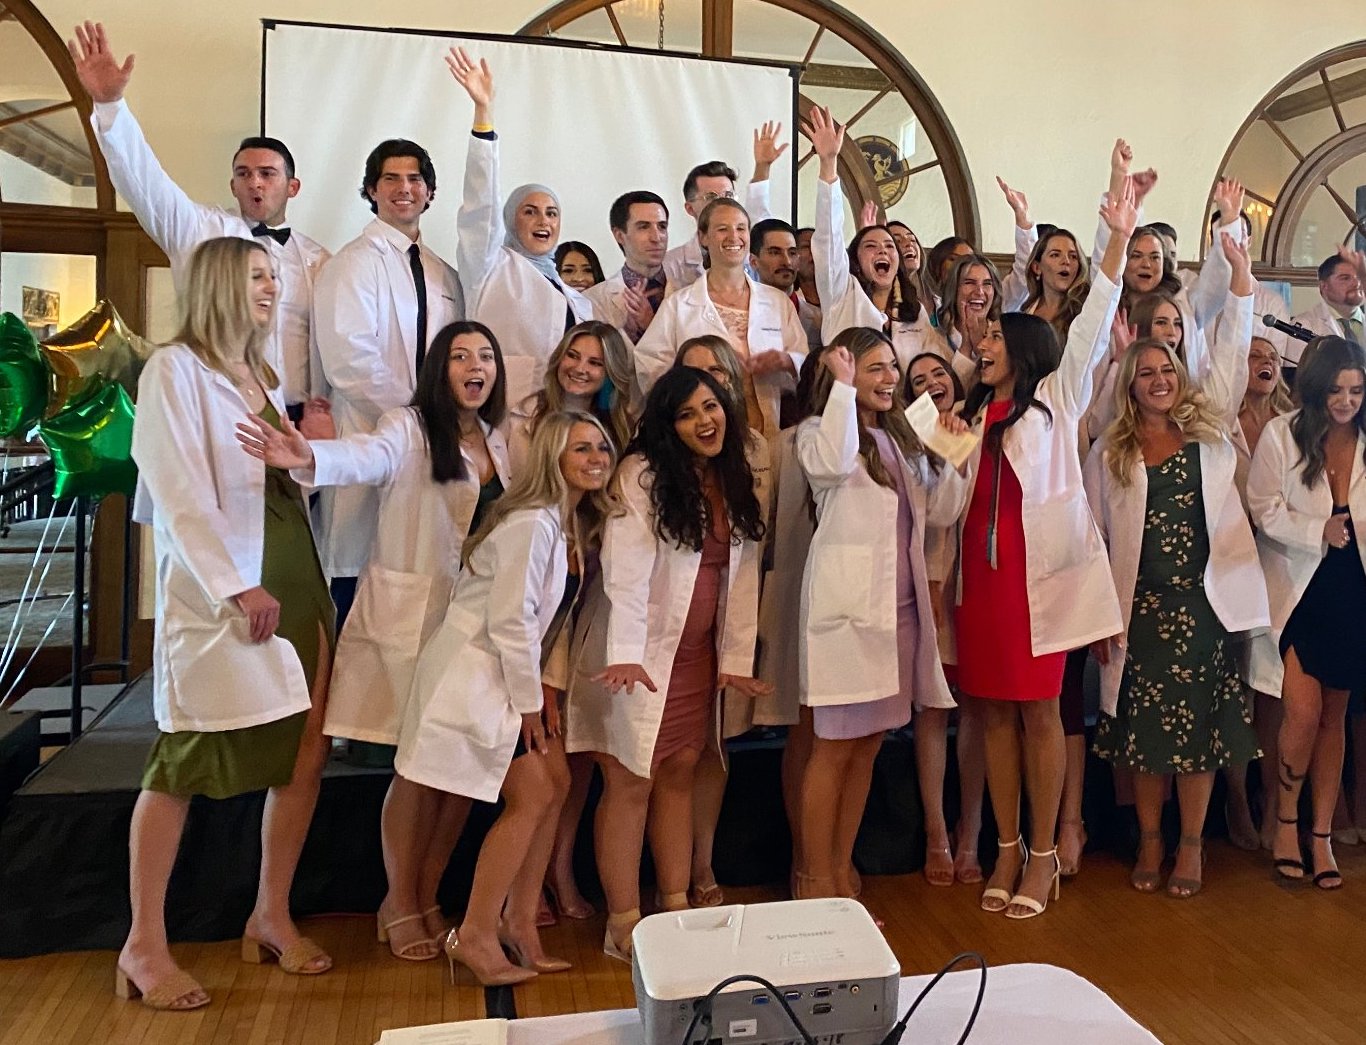 Wayne State PAS students earn their white coats